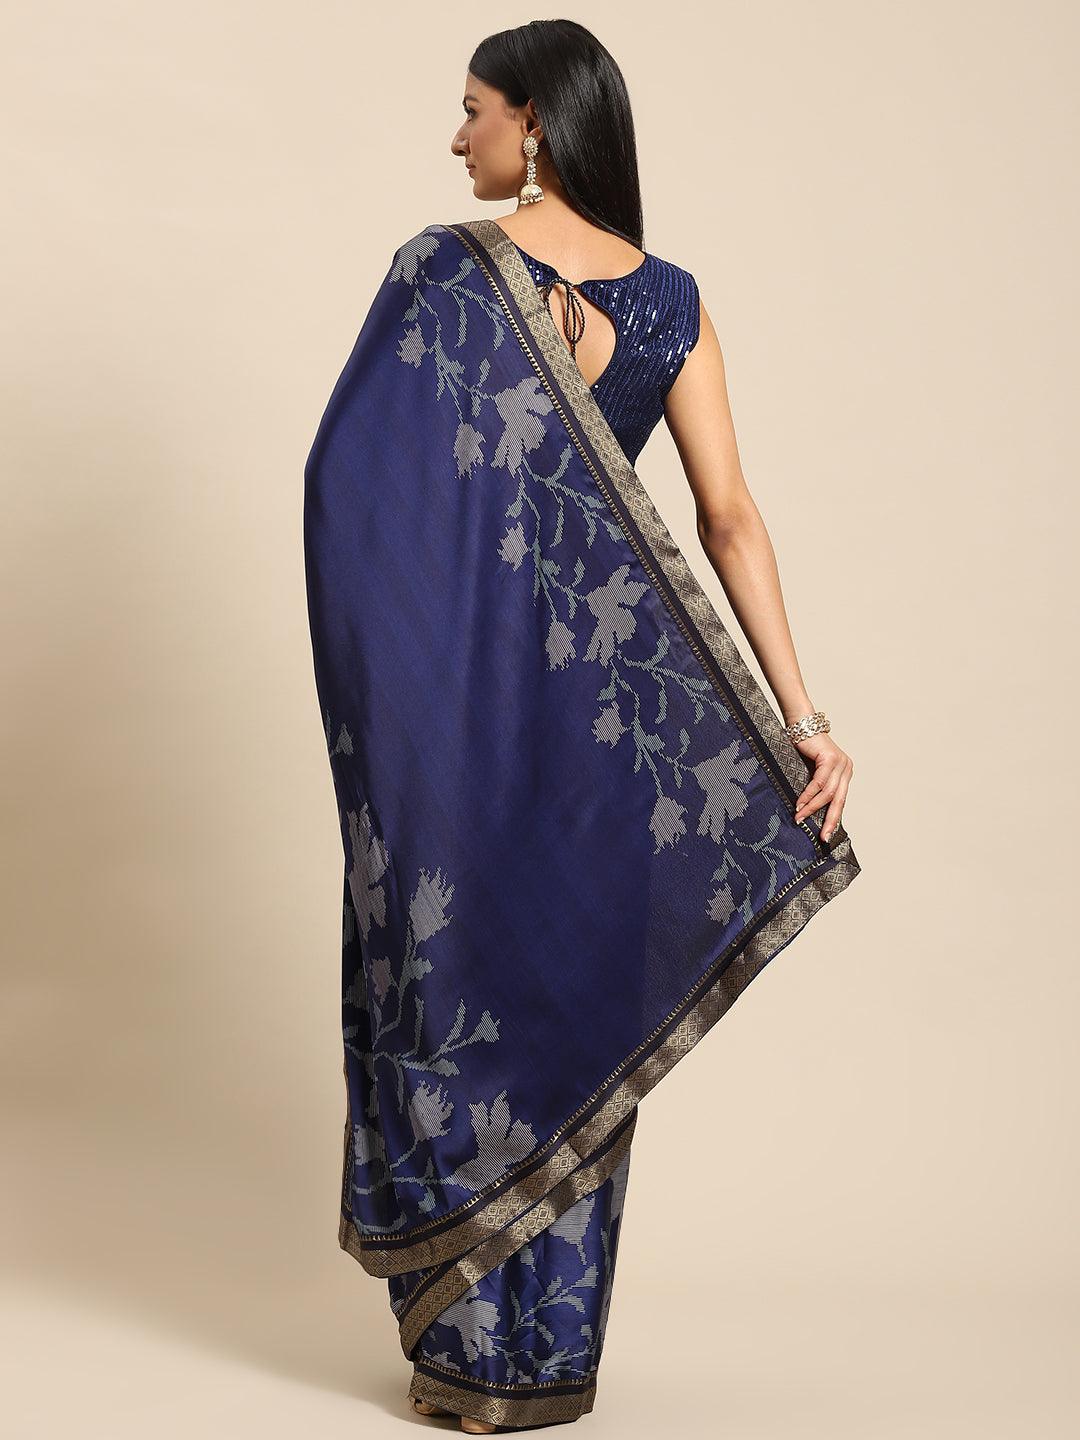 Designer Blue Floral Printed Satin Saree With Blouse. - Indiakreations